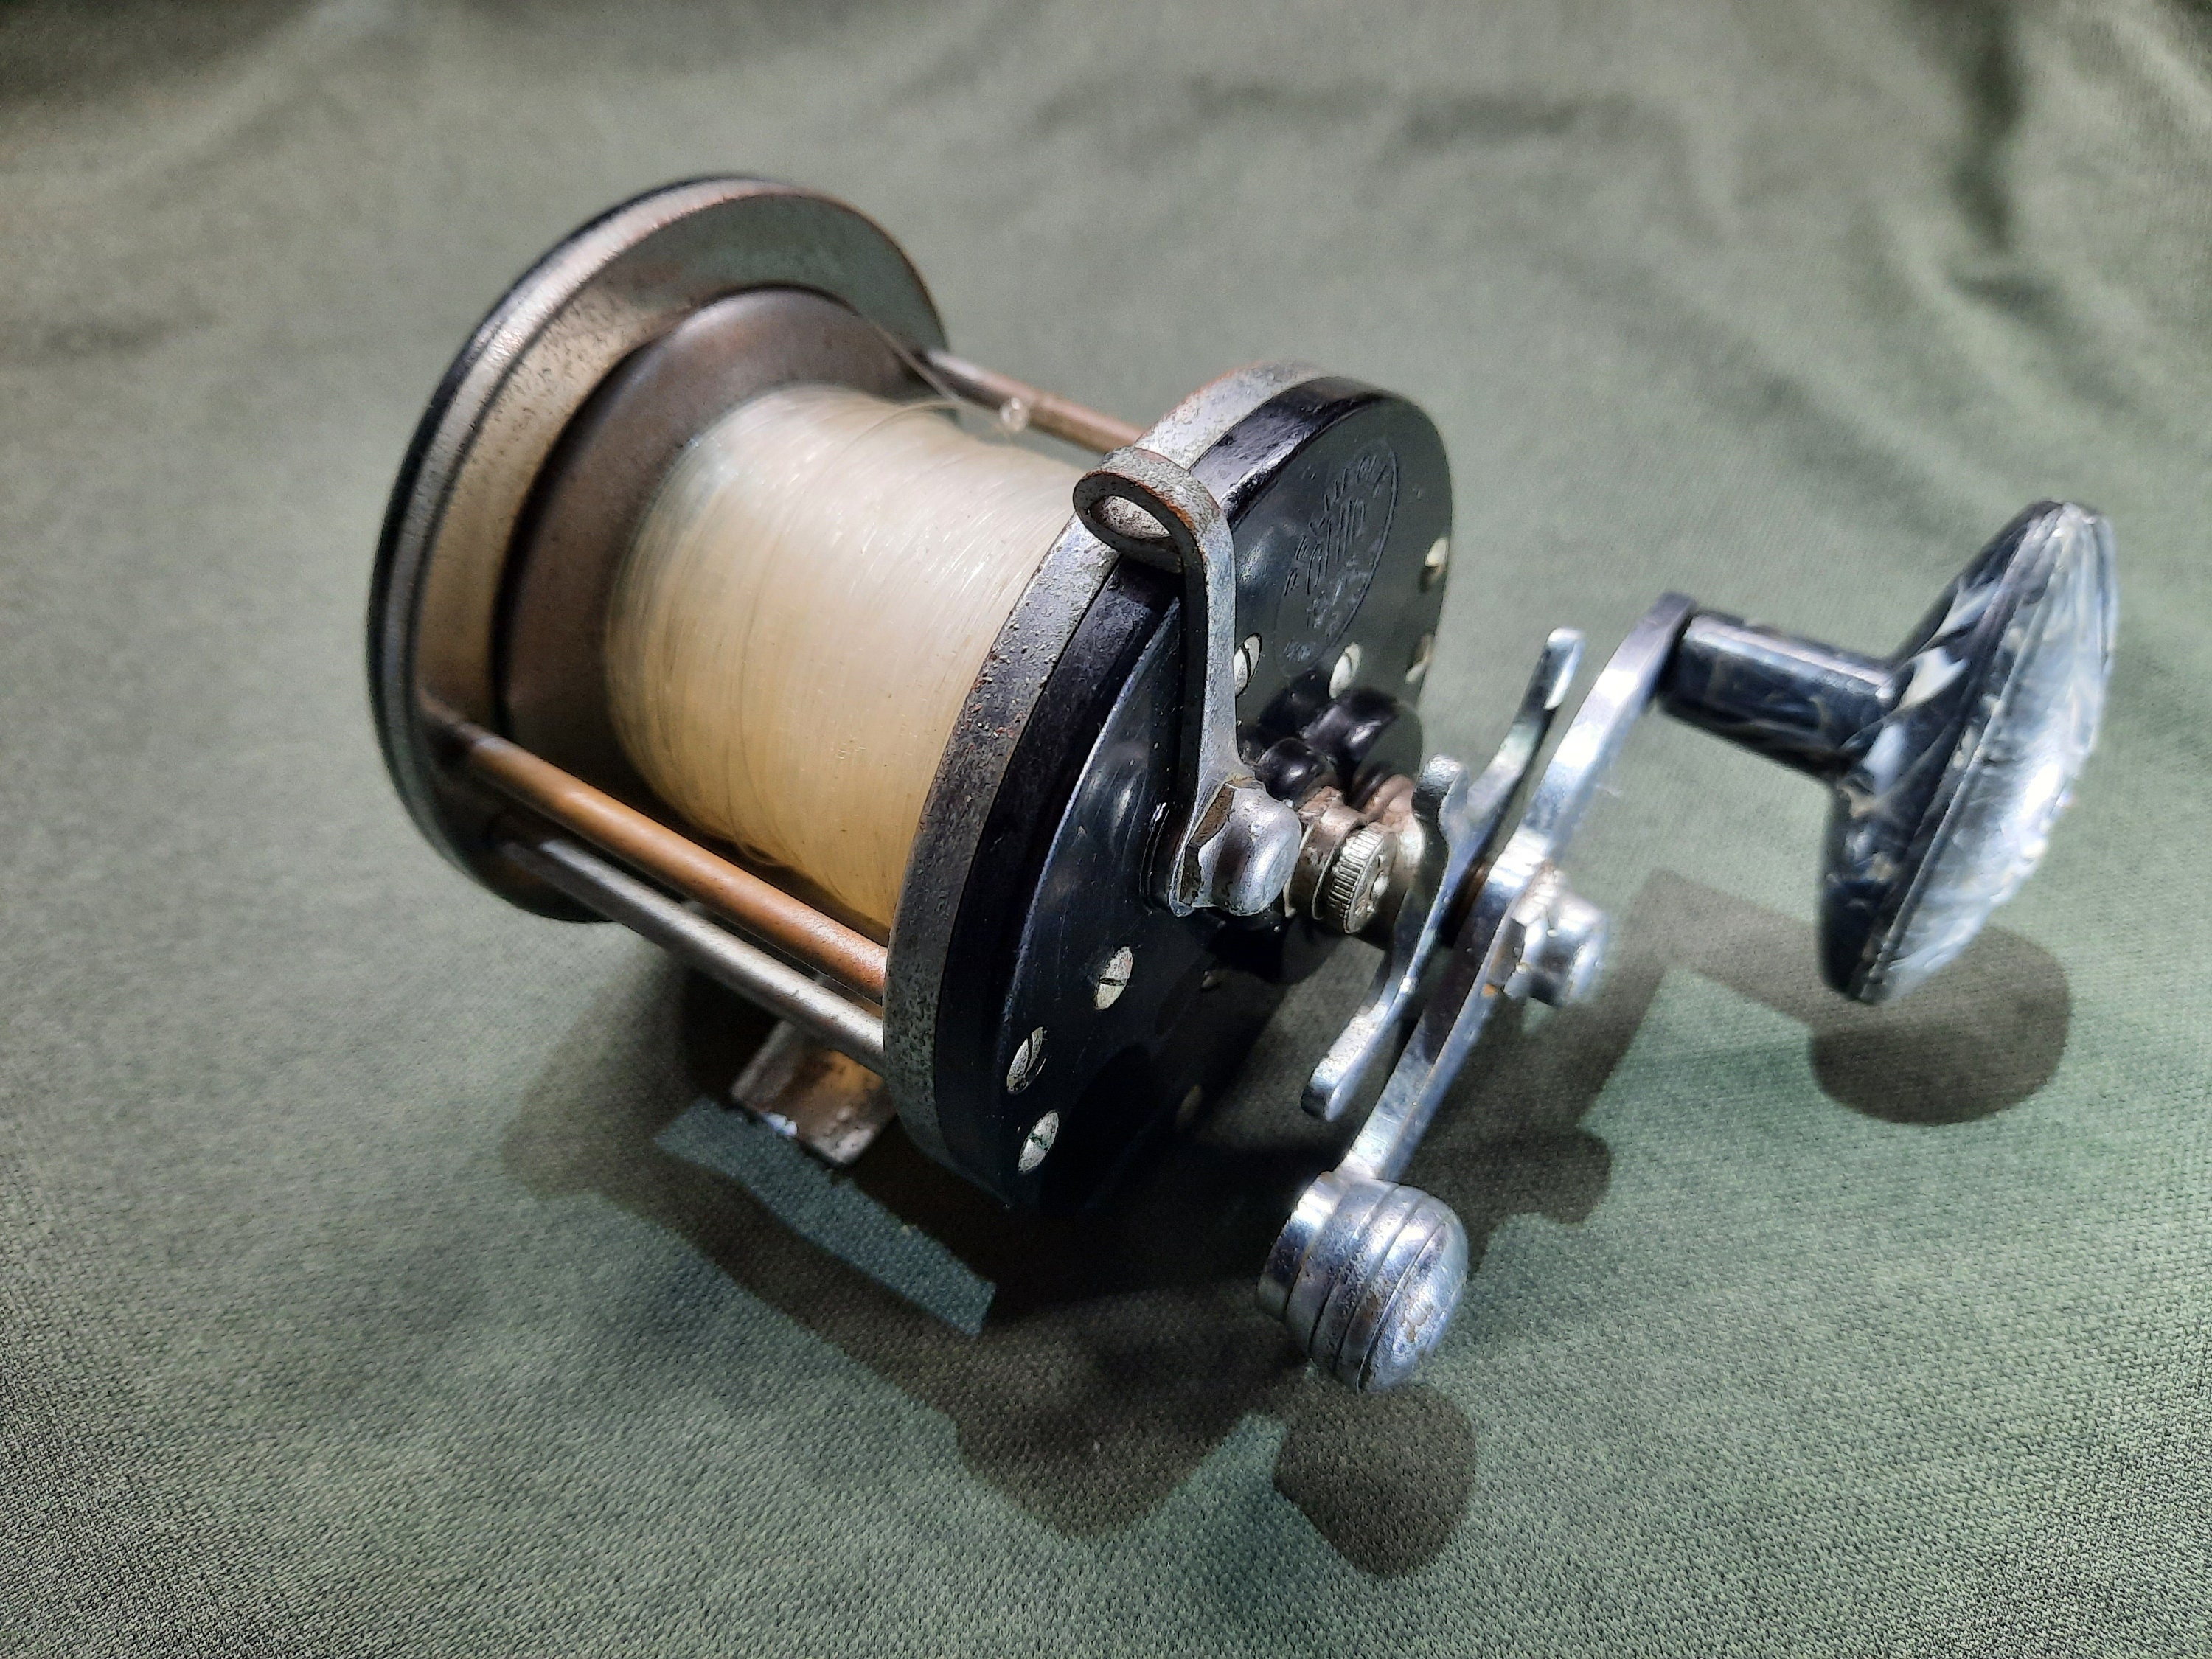 Vintage old rare pflueger 510 supreme freshwater baitcasting reel great  cond for Sale in Elizabeth City, NC - OfferUp